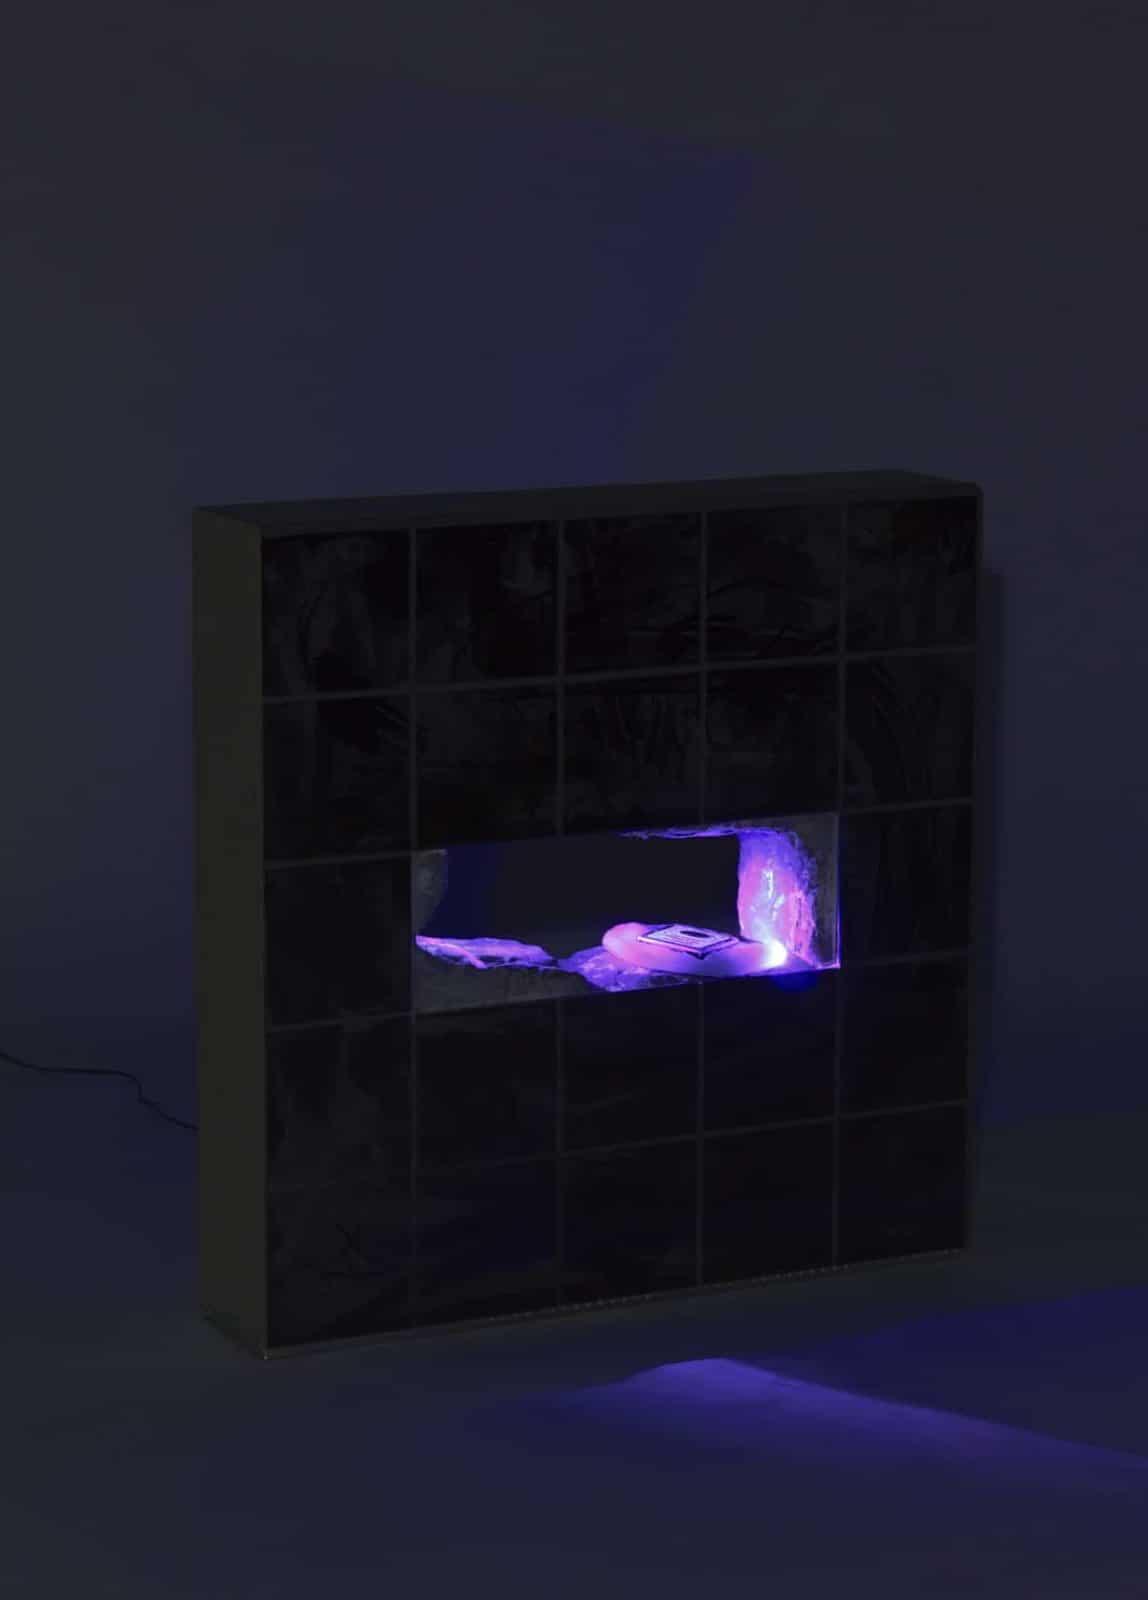 A medium height sculpture covered with tiles and a hole with a harddrive and lights